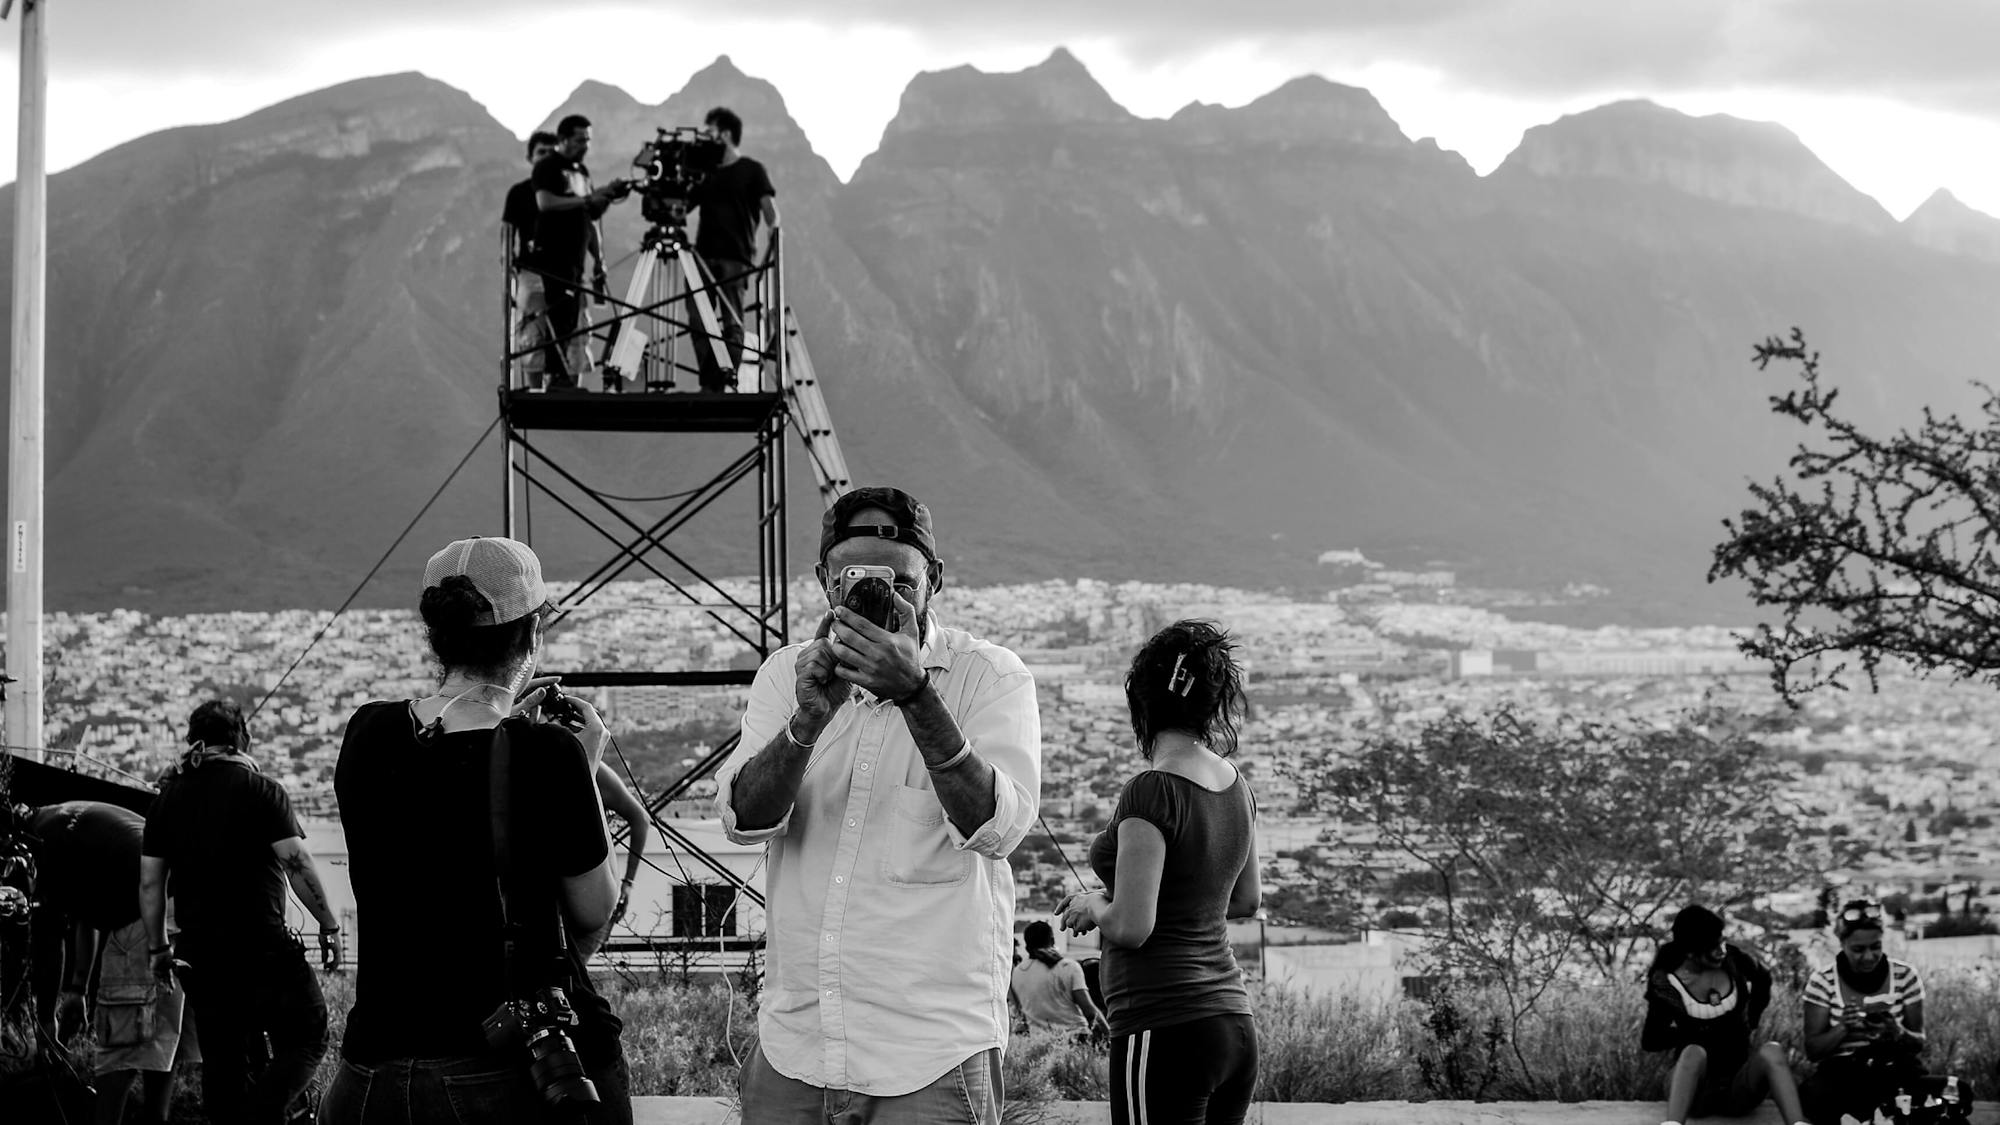 Frías de la Parra holds his camera up to his eye. Behind him, his crew prepares for a scene set against the striking mountains of Monterrey.